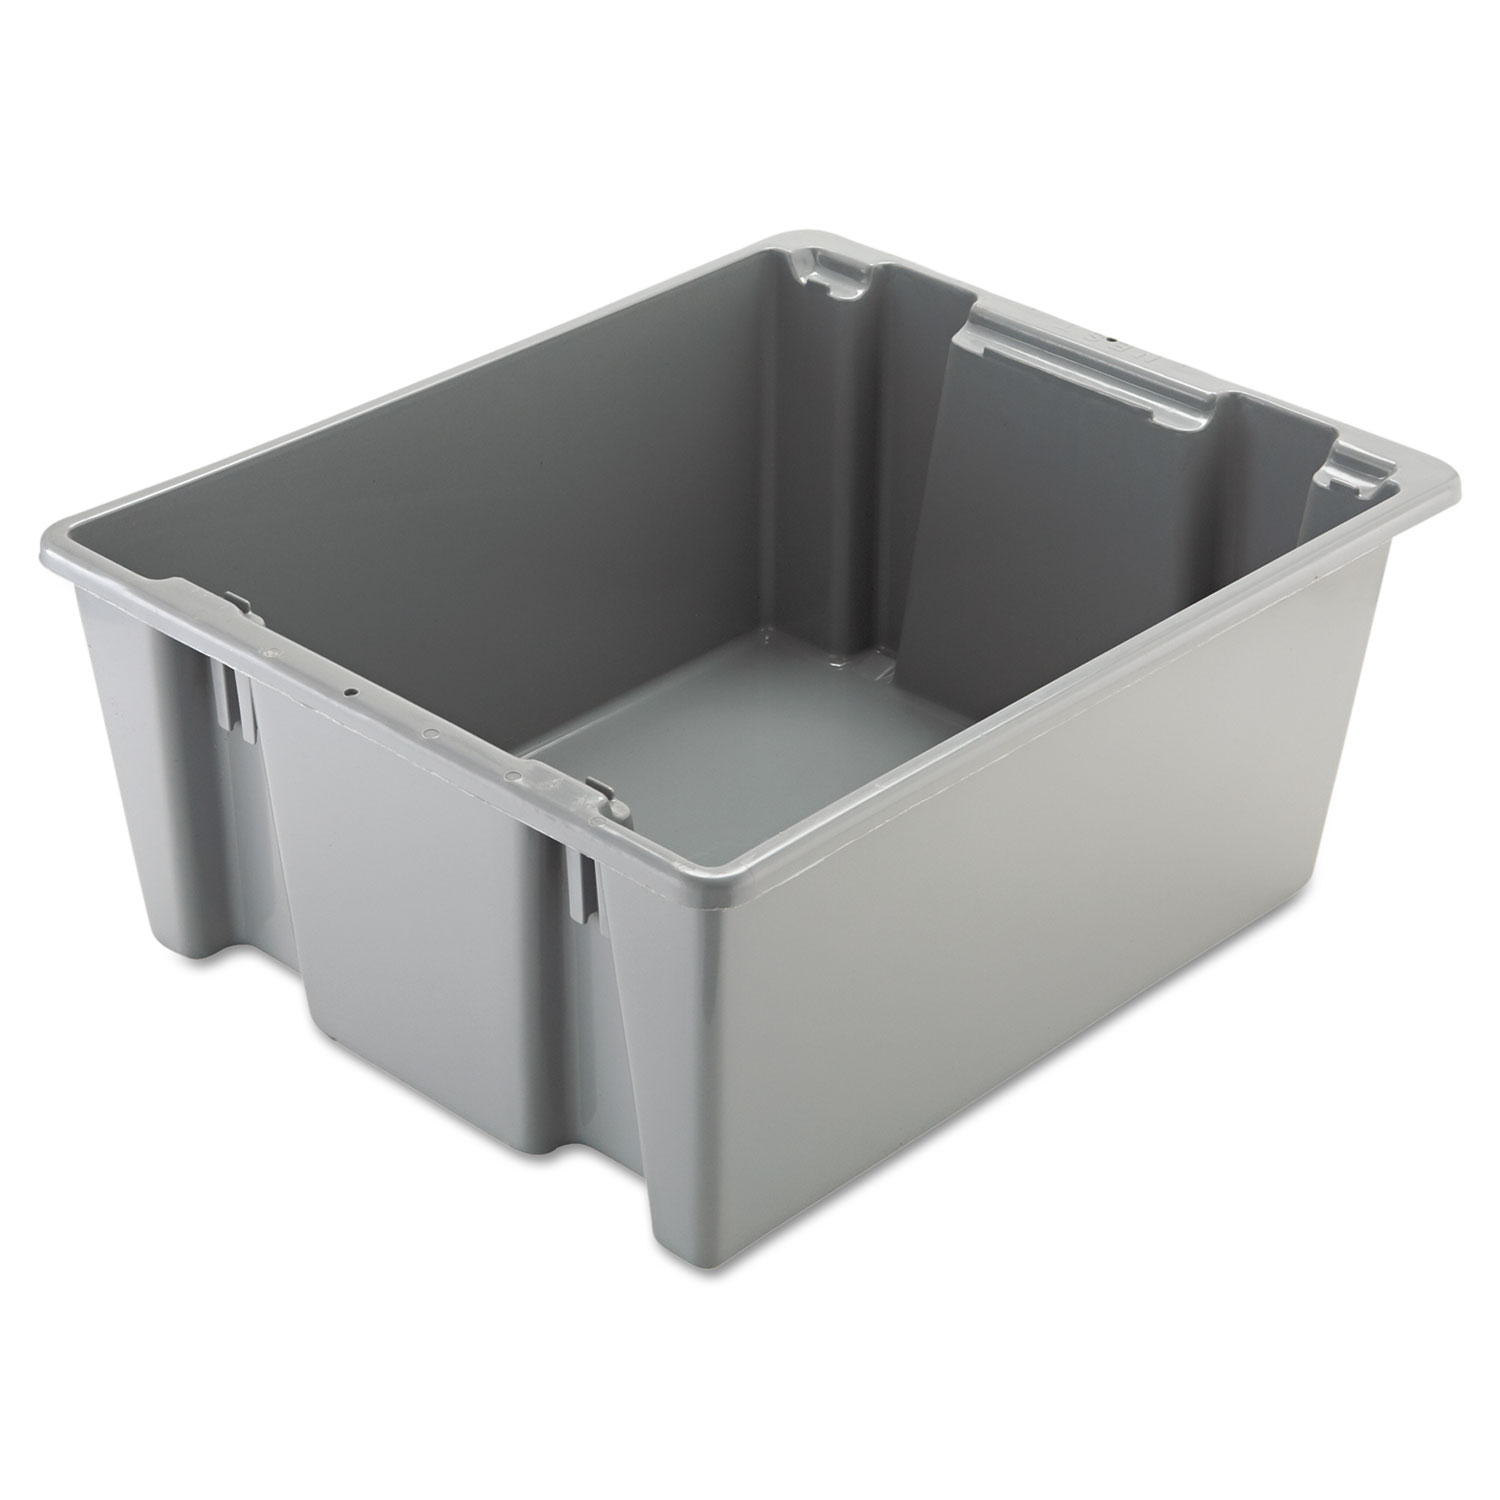  Rubbermaid Commercial 173100GRAY Palletote Box, 19gal, Gray (RCP1731GRA) 